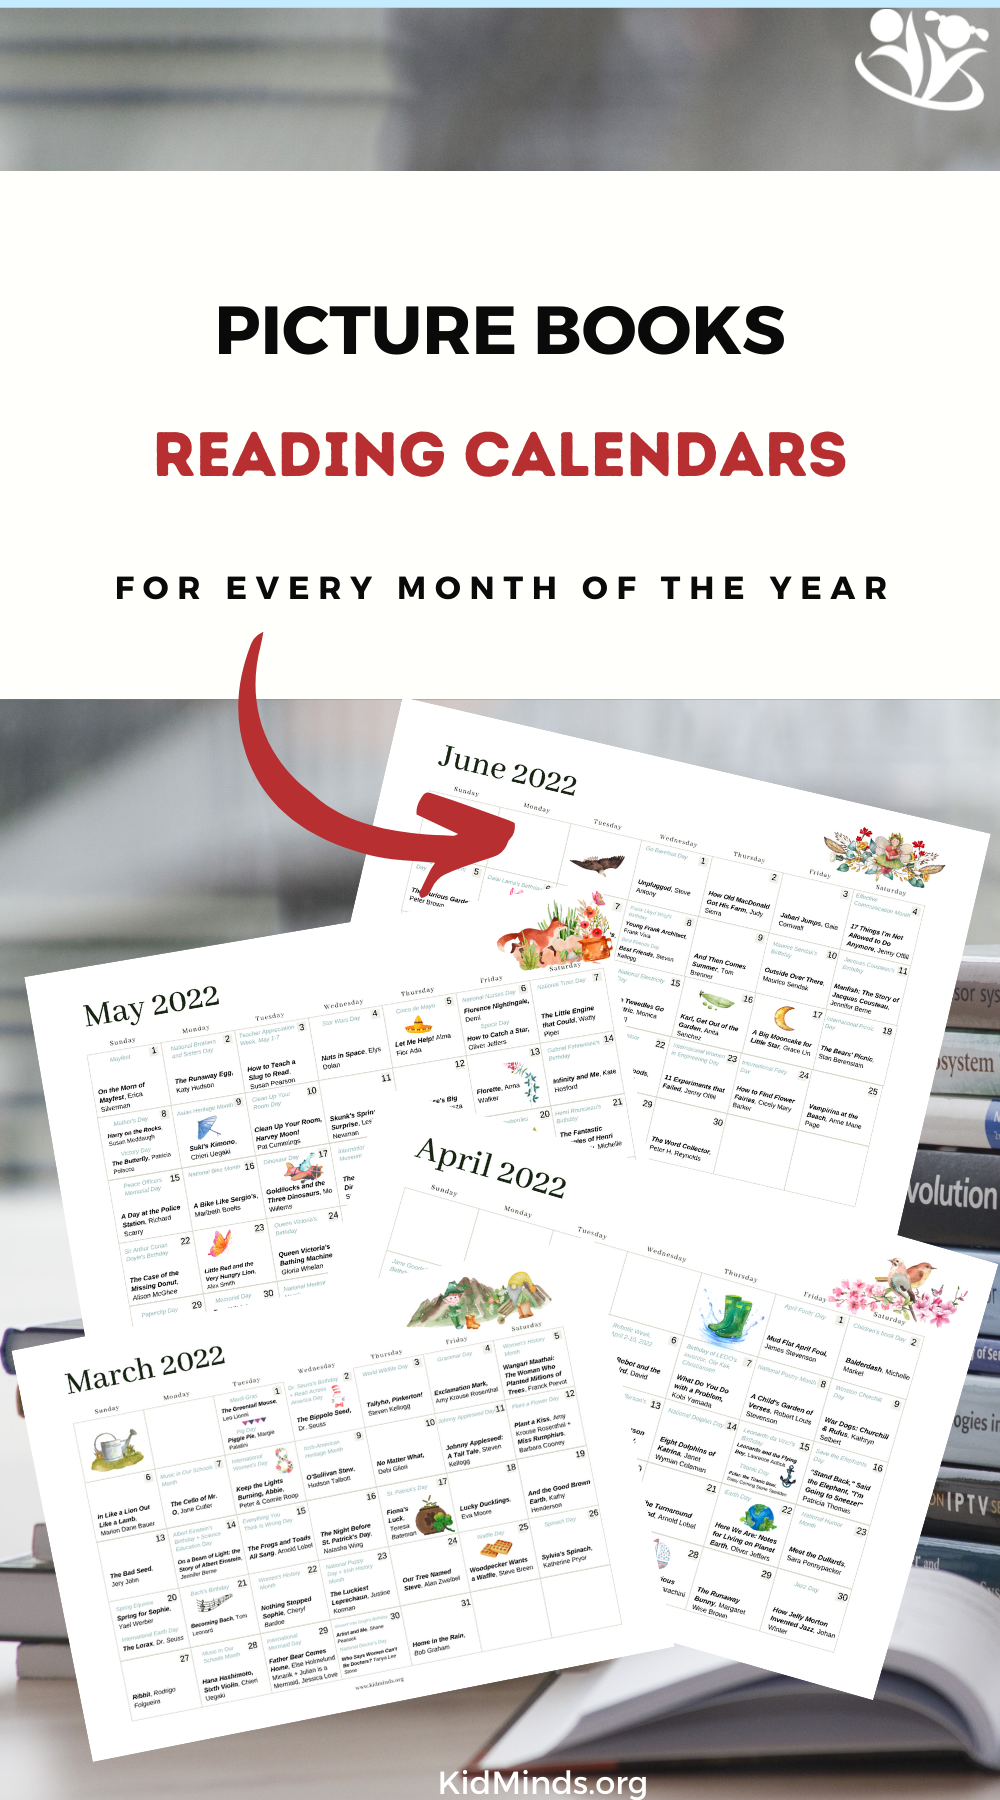 Printable Calendars! From picture books that you can use with kids of all ages as conversation starters (and warm-up activities) to fun holidays (big and small) that you and your kids can use to turn any day of the year into a celebration. #familyfun #raisingreaders #kidsactivities